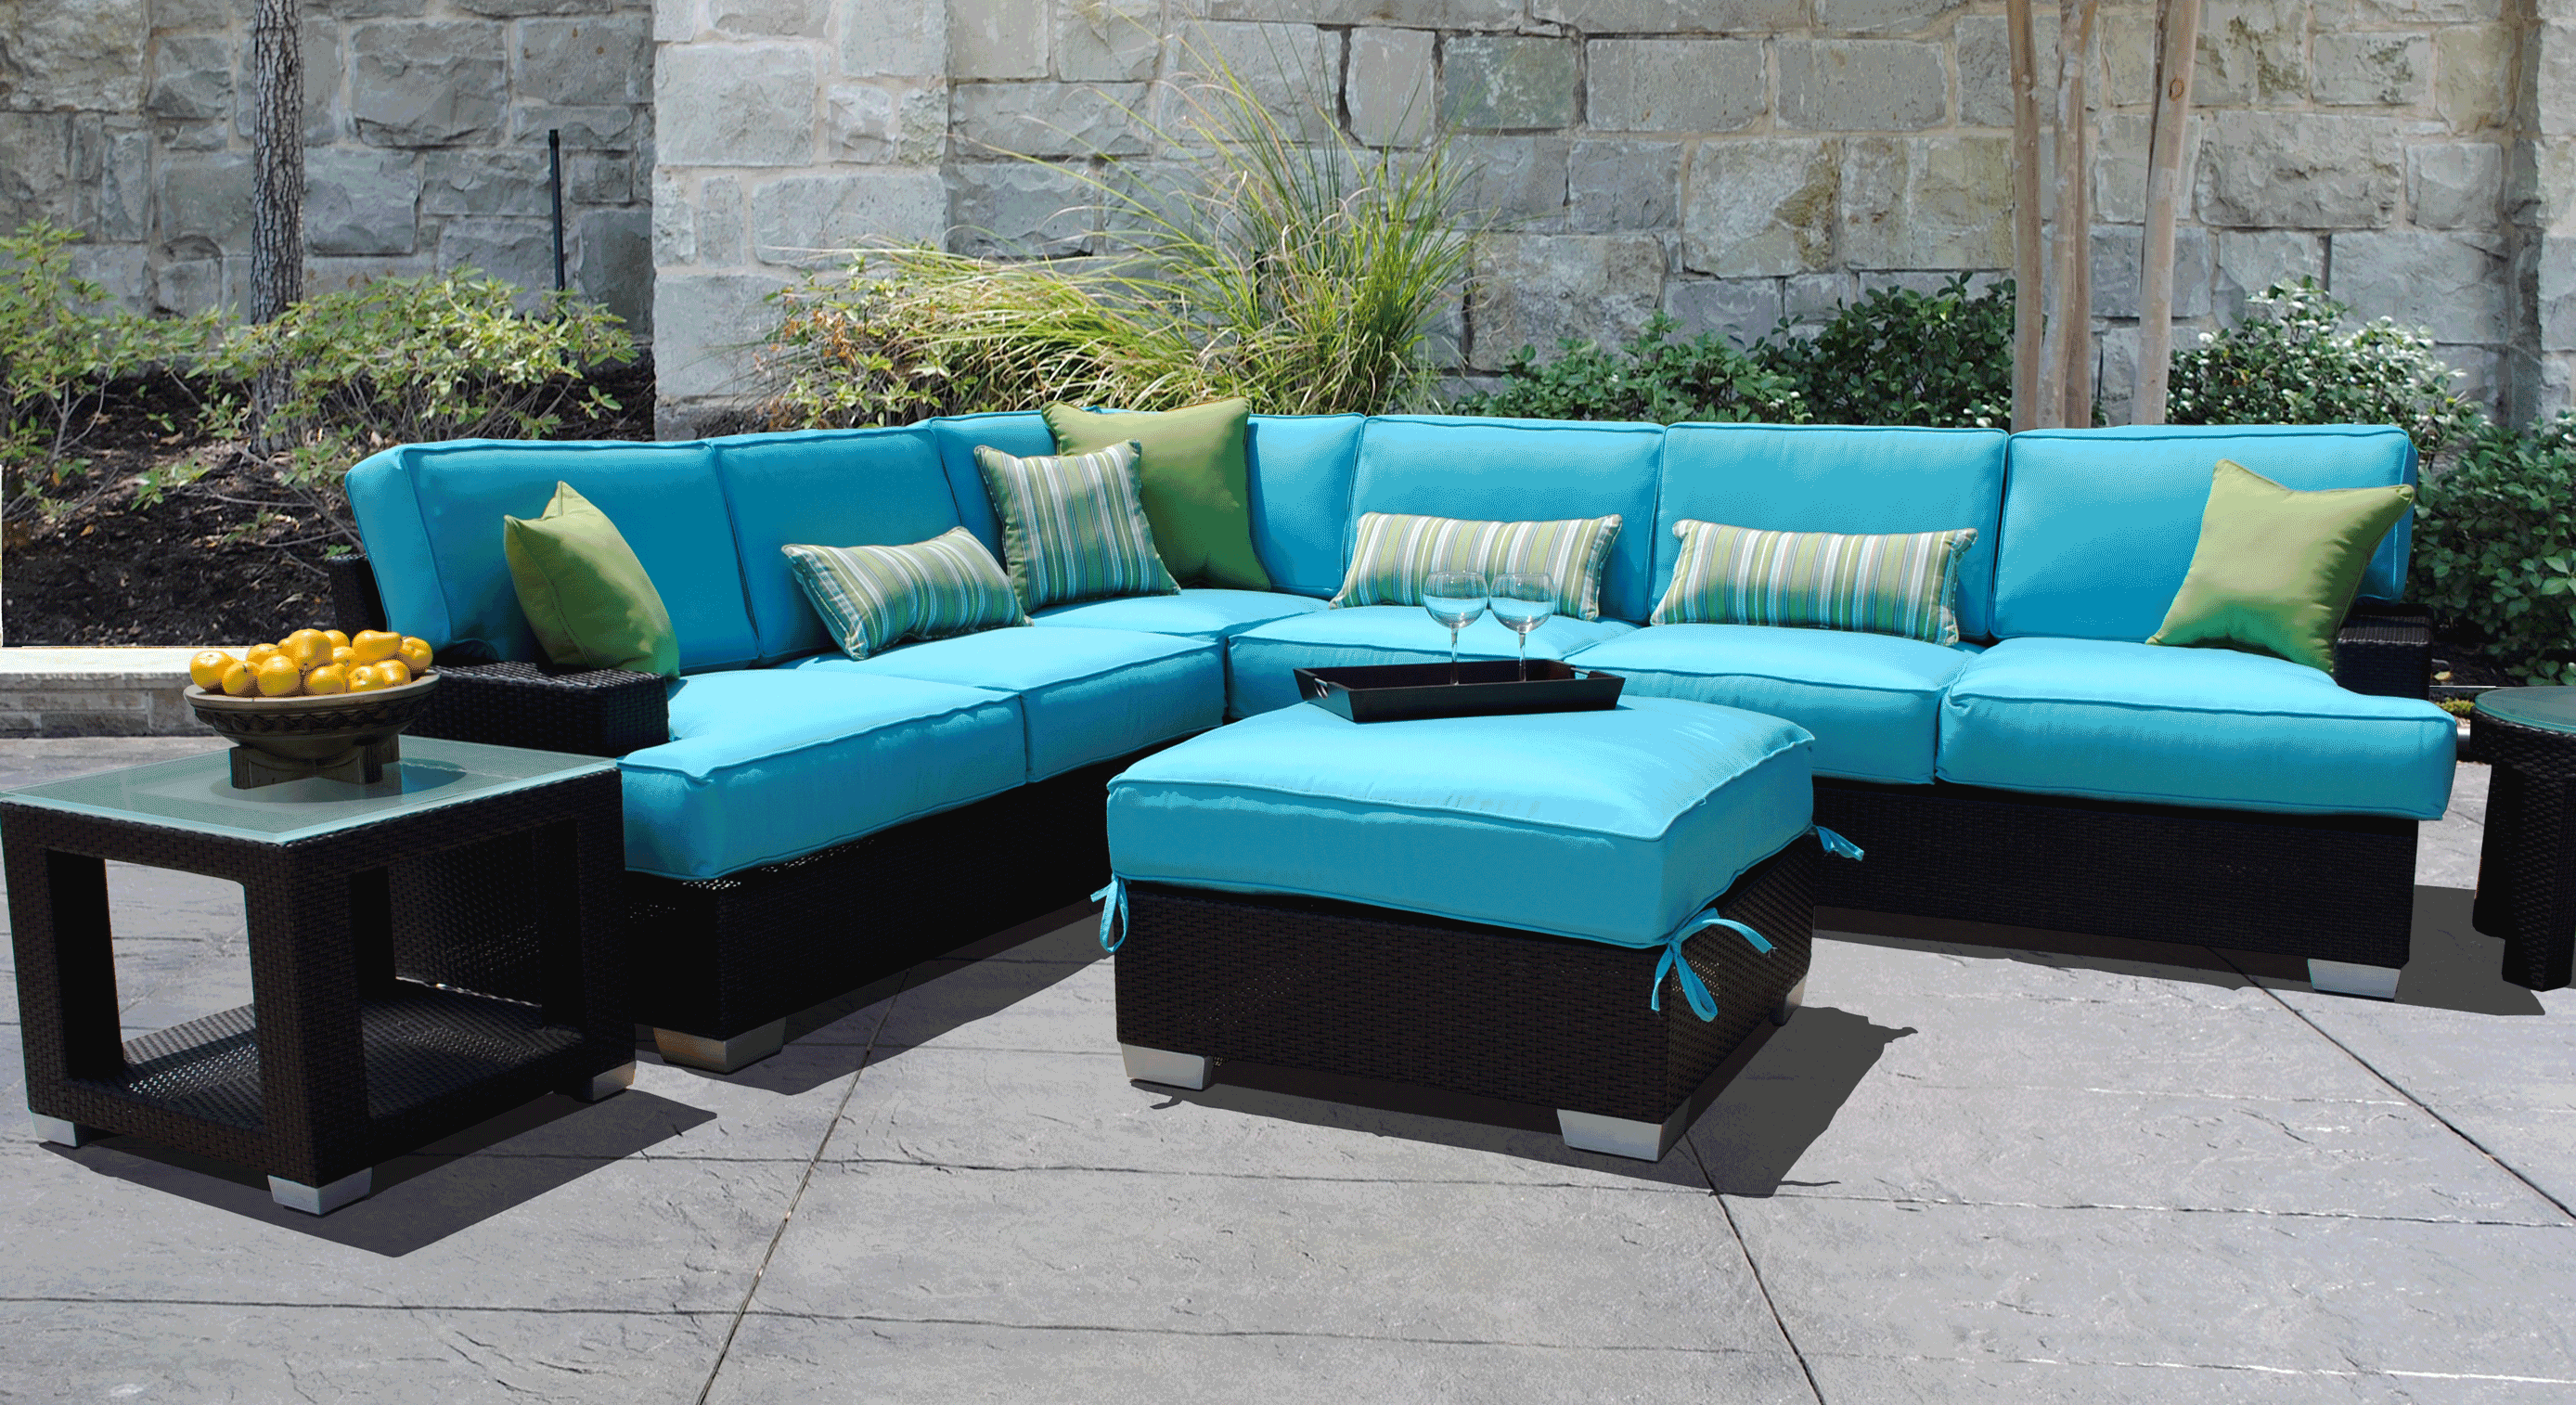 Choosing The Ultimate Garden Furniture For Your Home